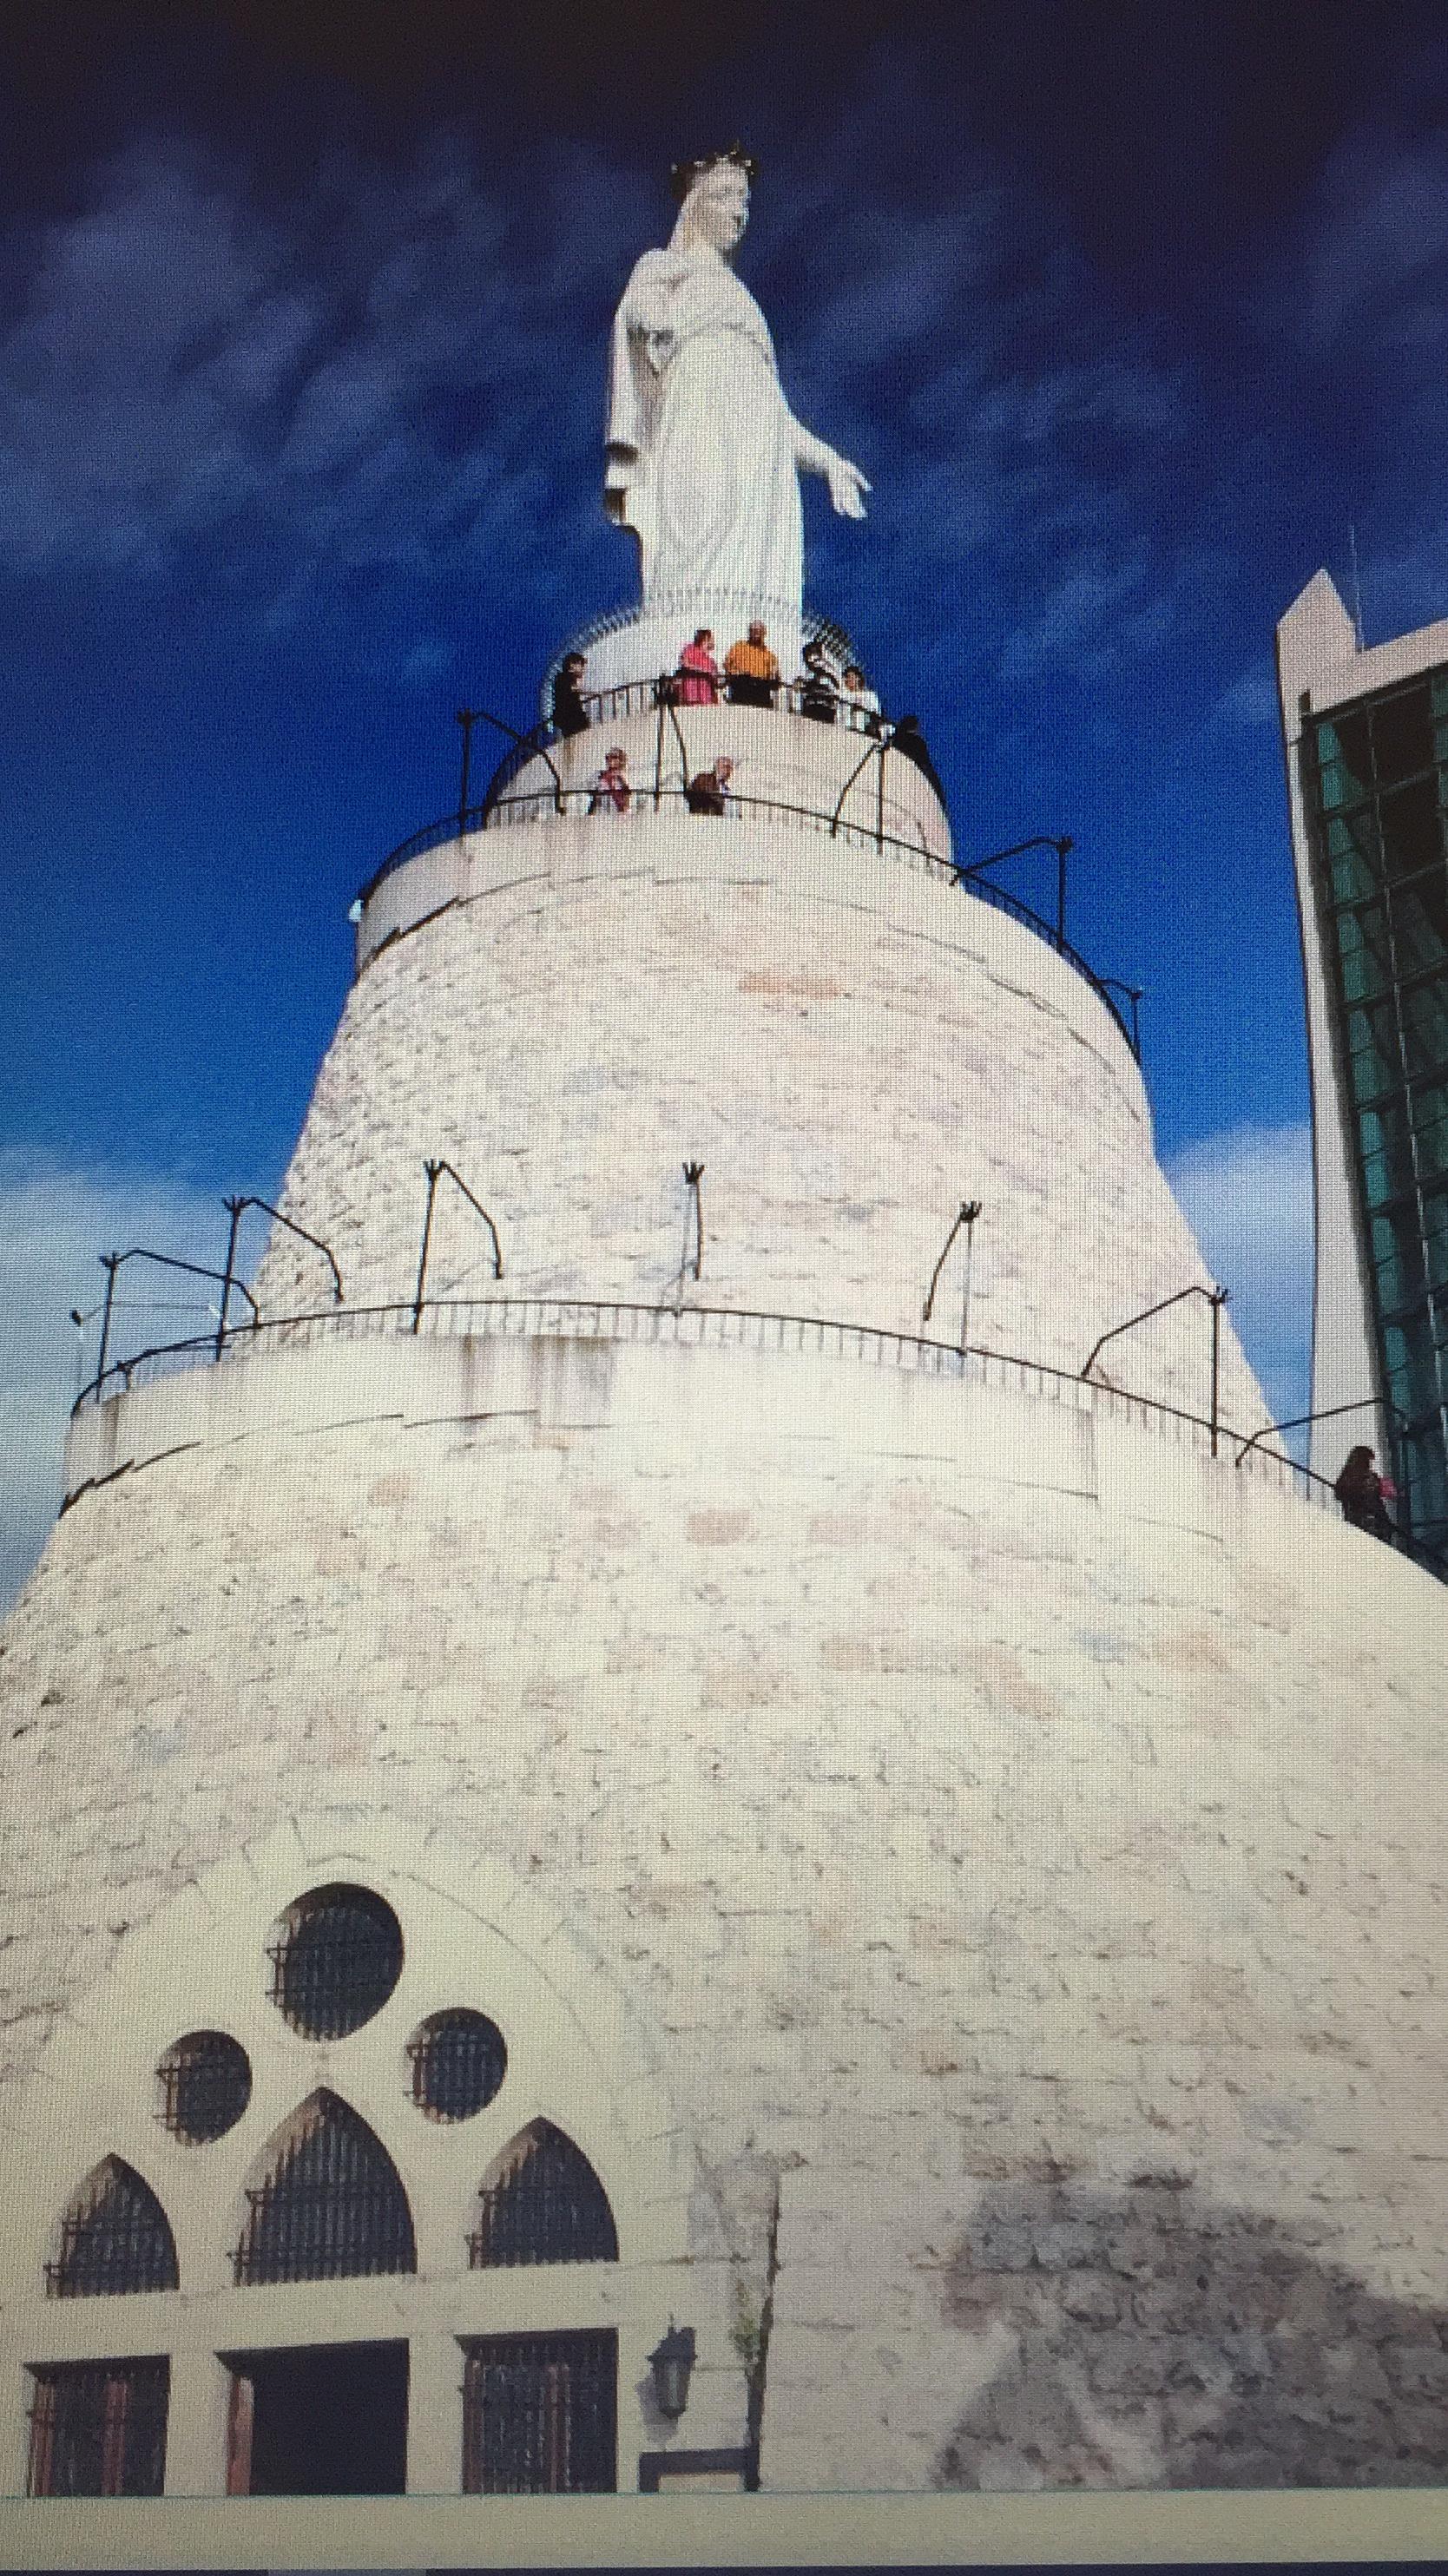 Cover image of this place Notre Dame du Liban Harissa